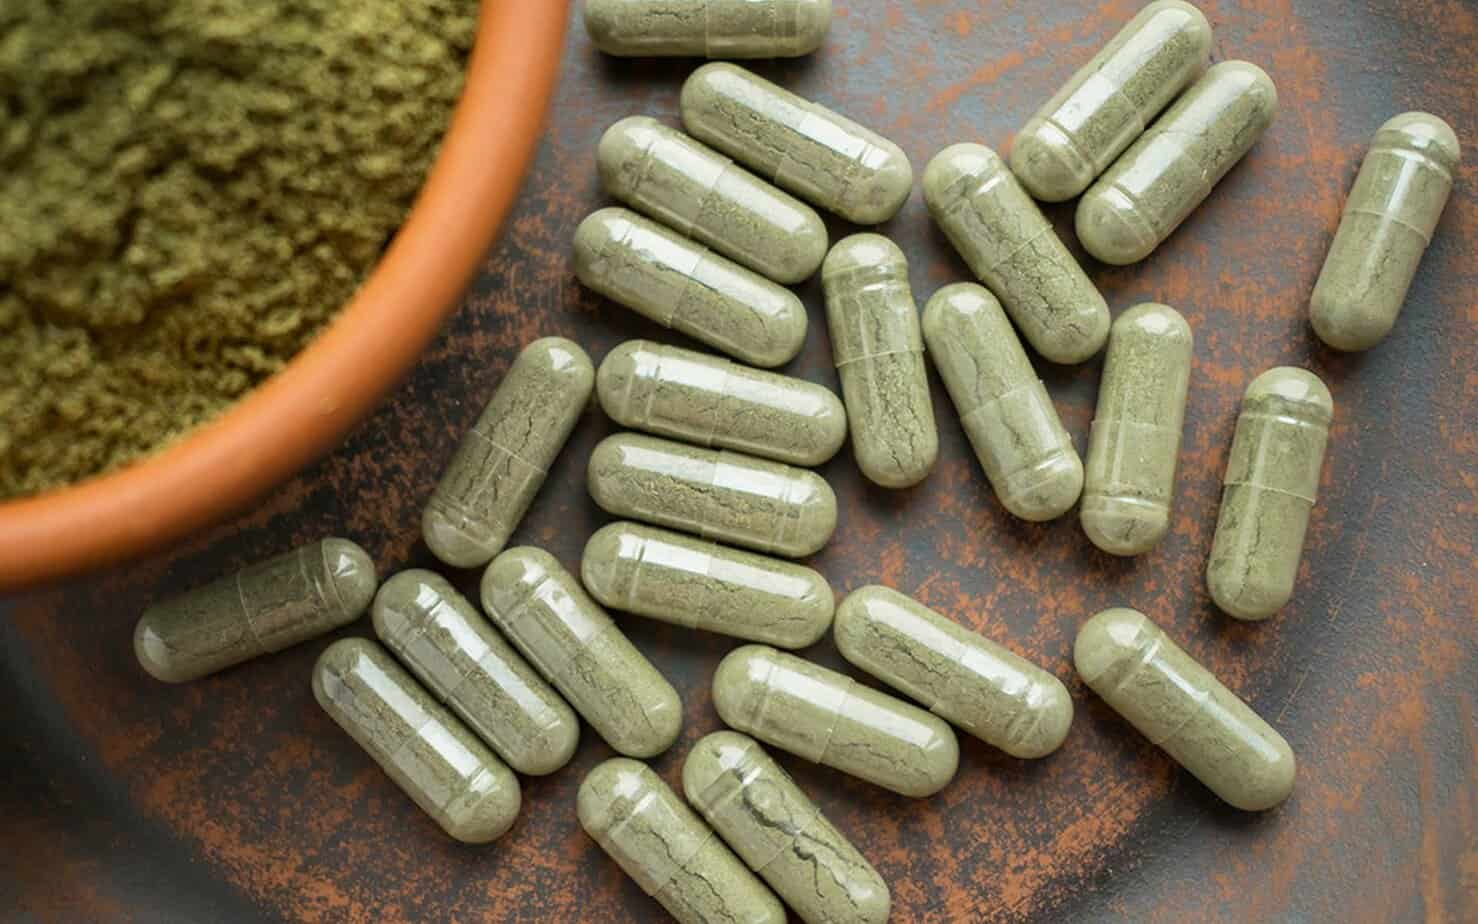 Study: Kratom Linked To Serious, Life-Threatening Side Effects